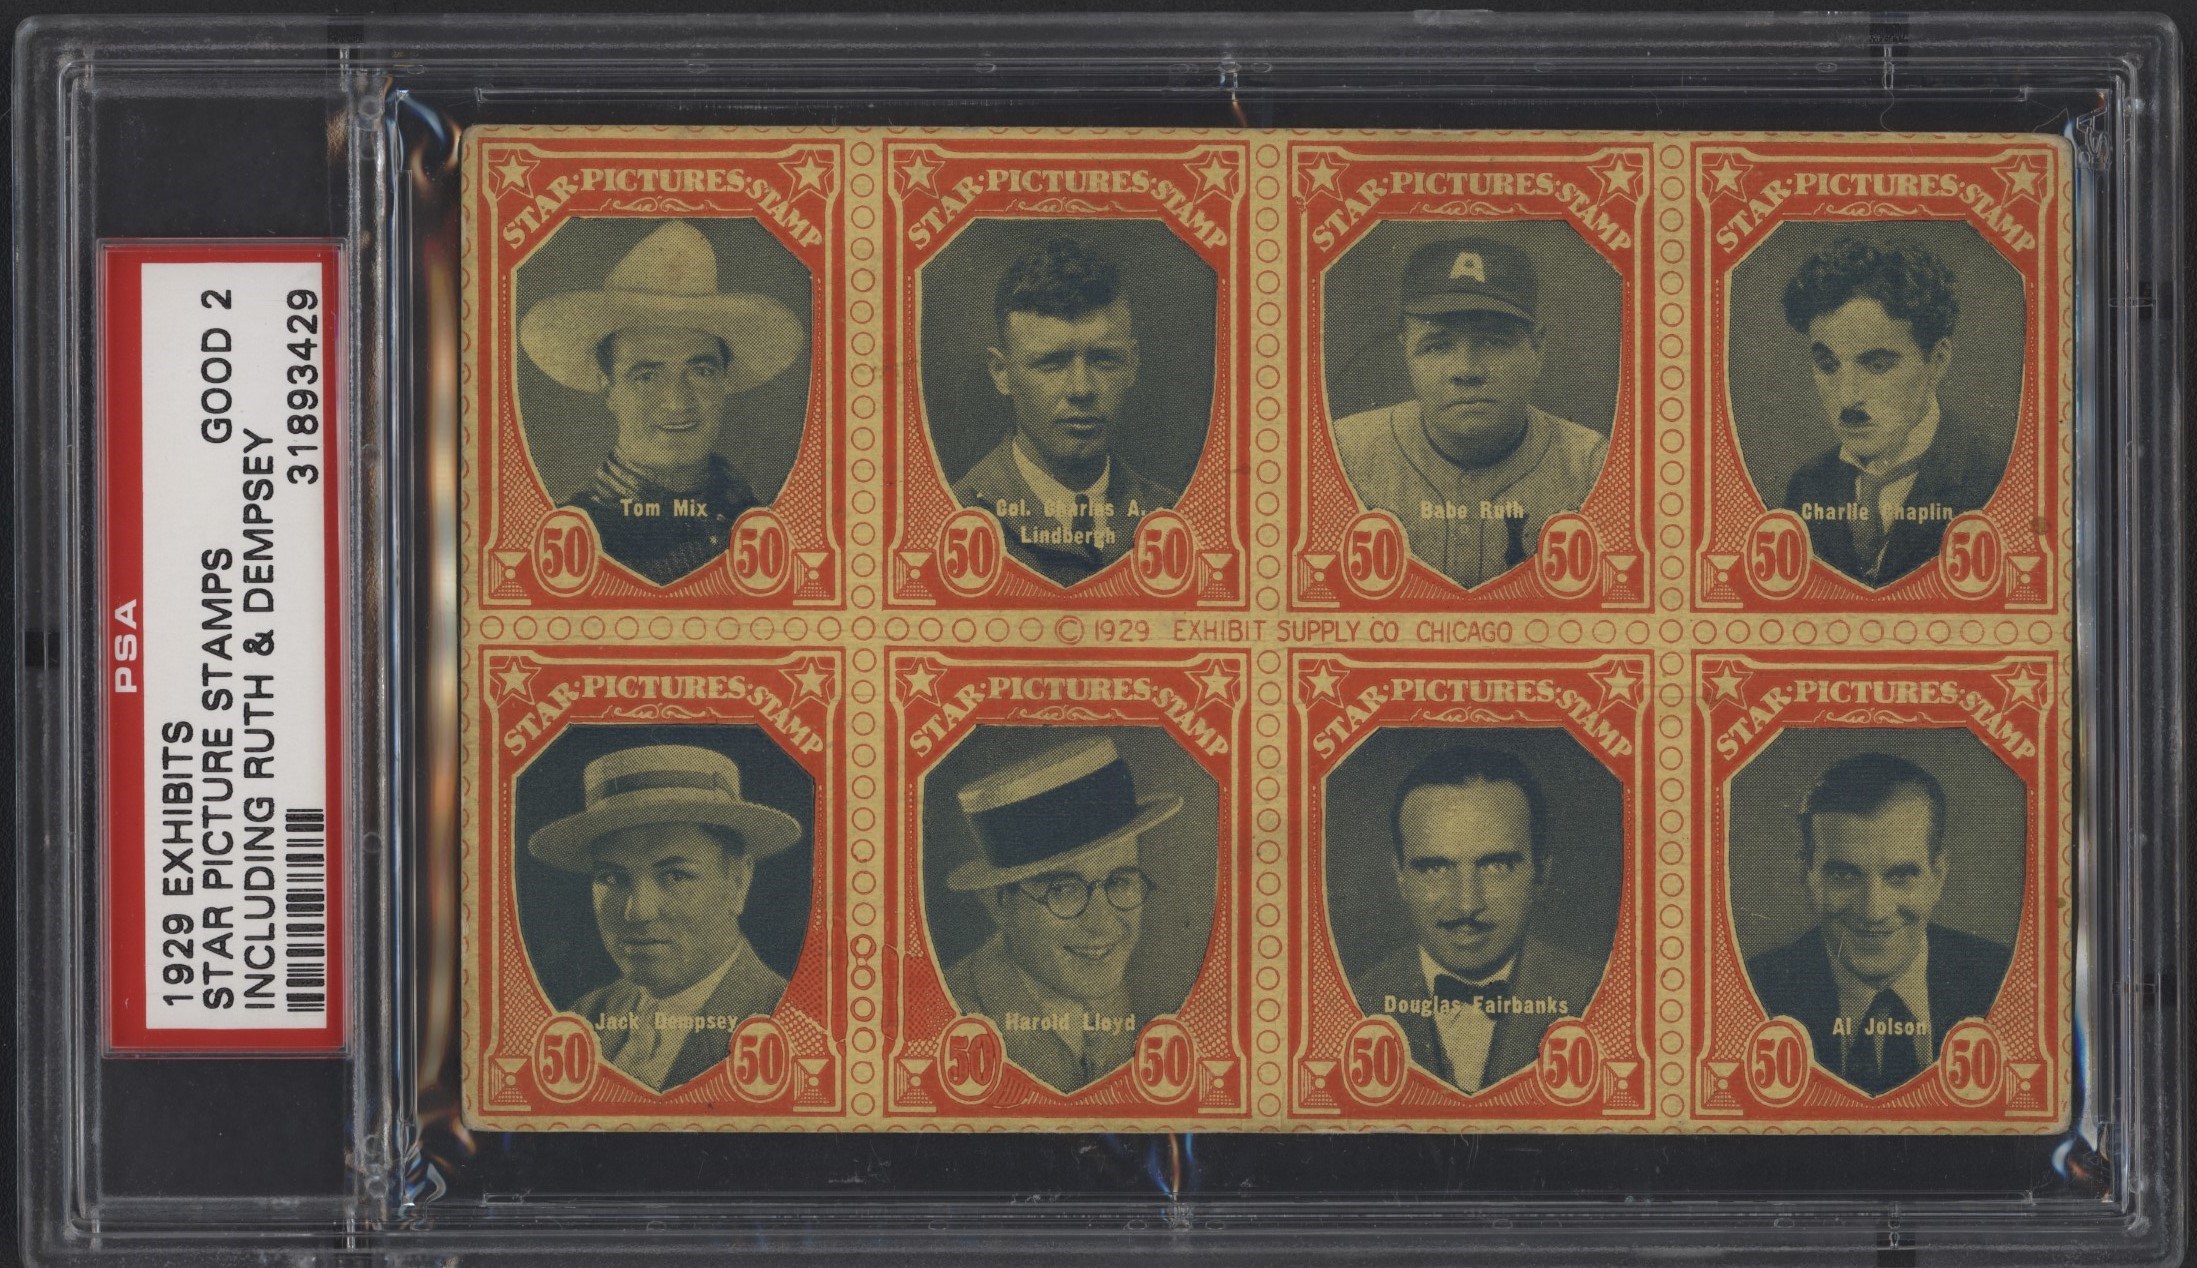 1929 Exhibits Star Picture Stamps Collection of (16) with (2) Ruth Sheets